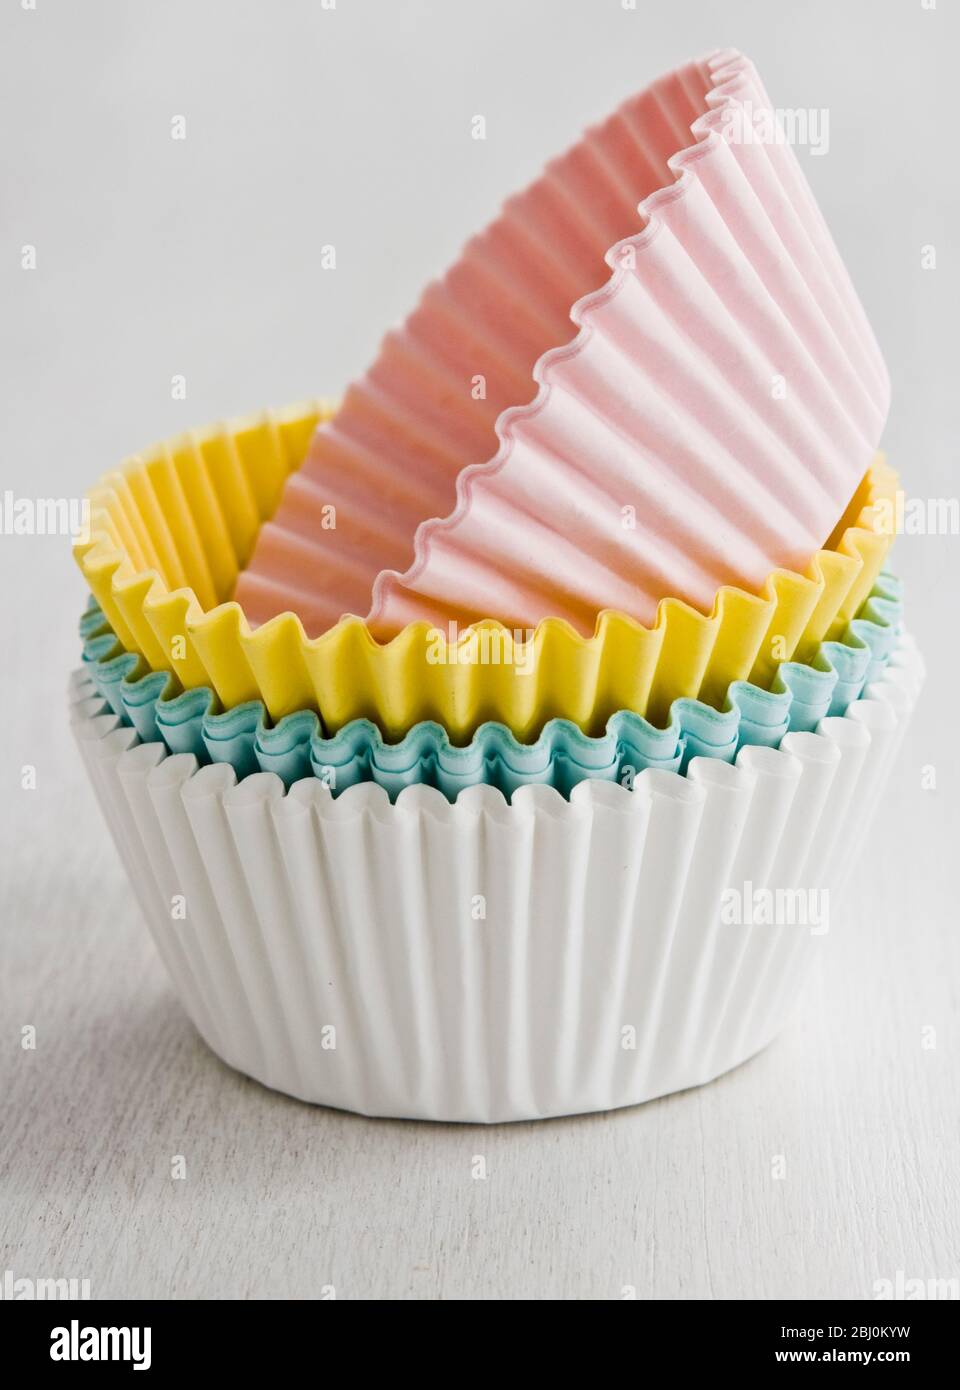 Stack of coloured paper cake and muffin cases - Stock Photo